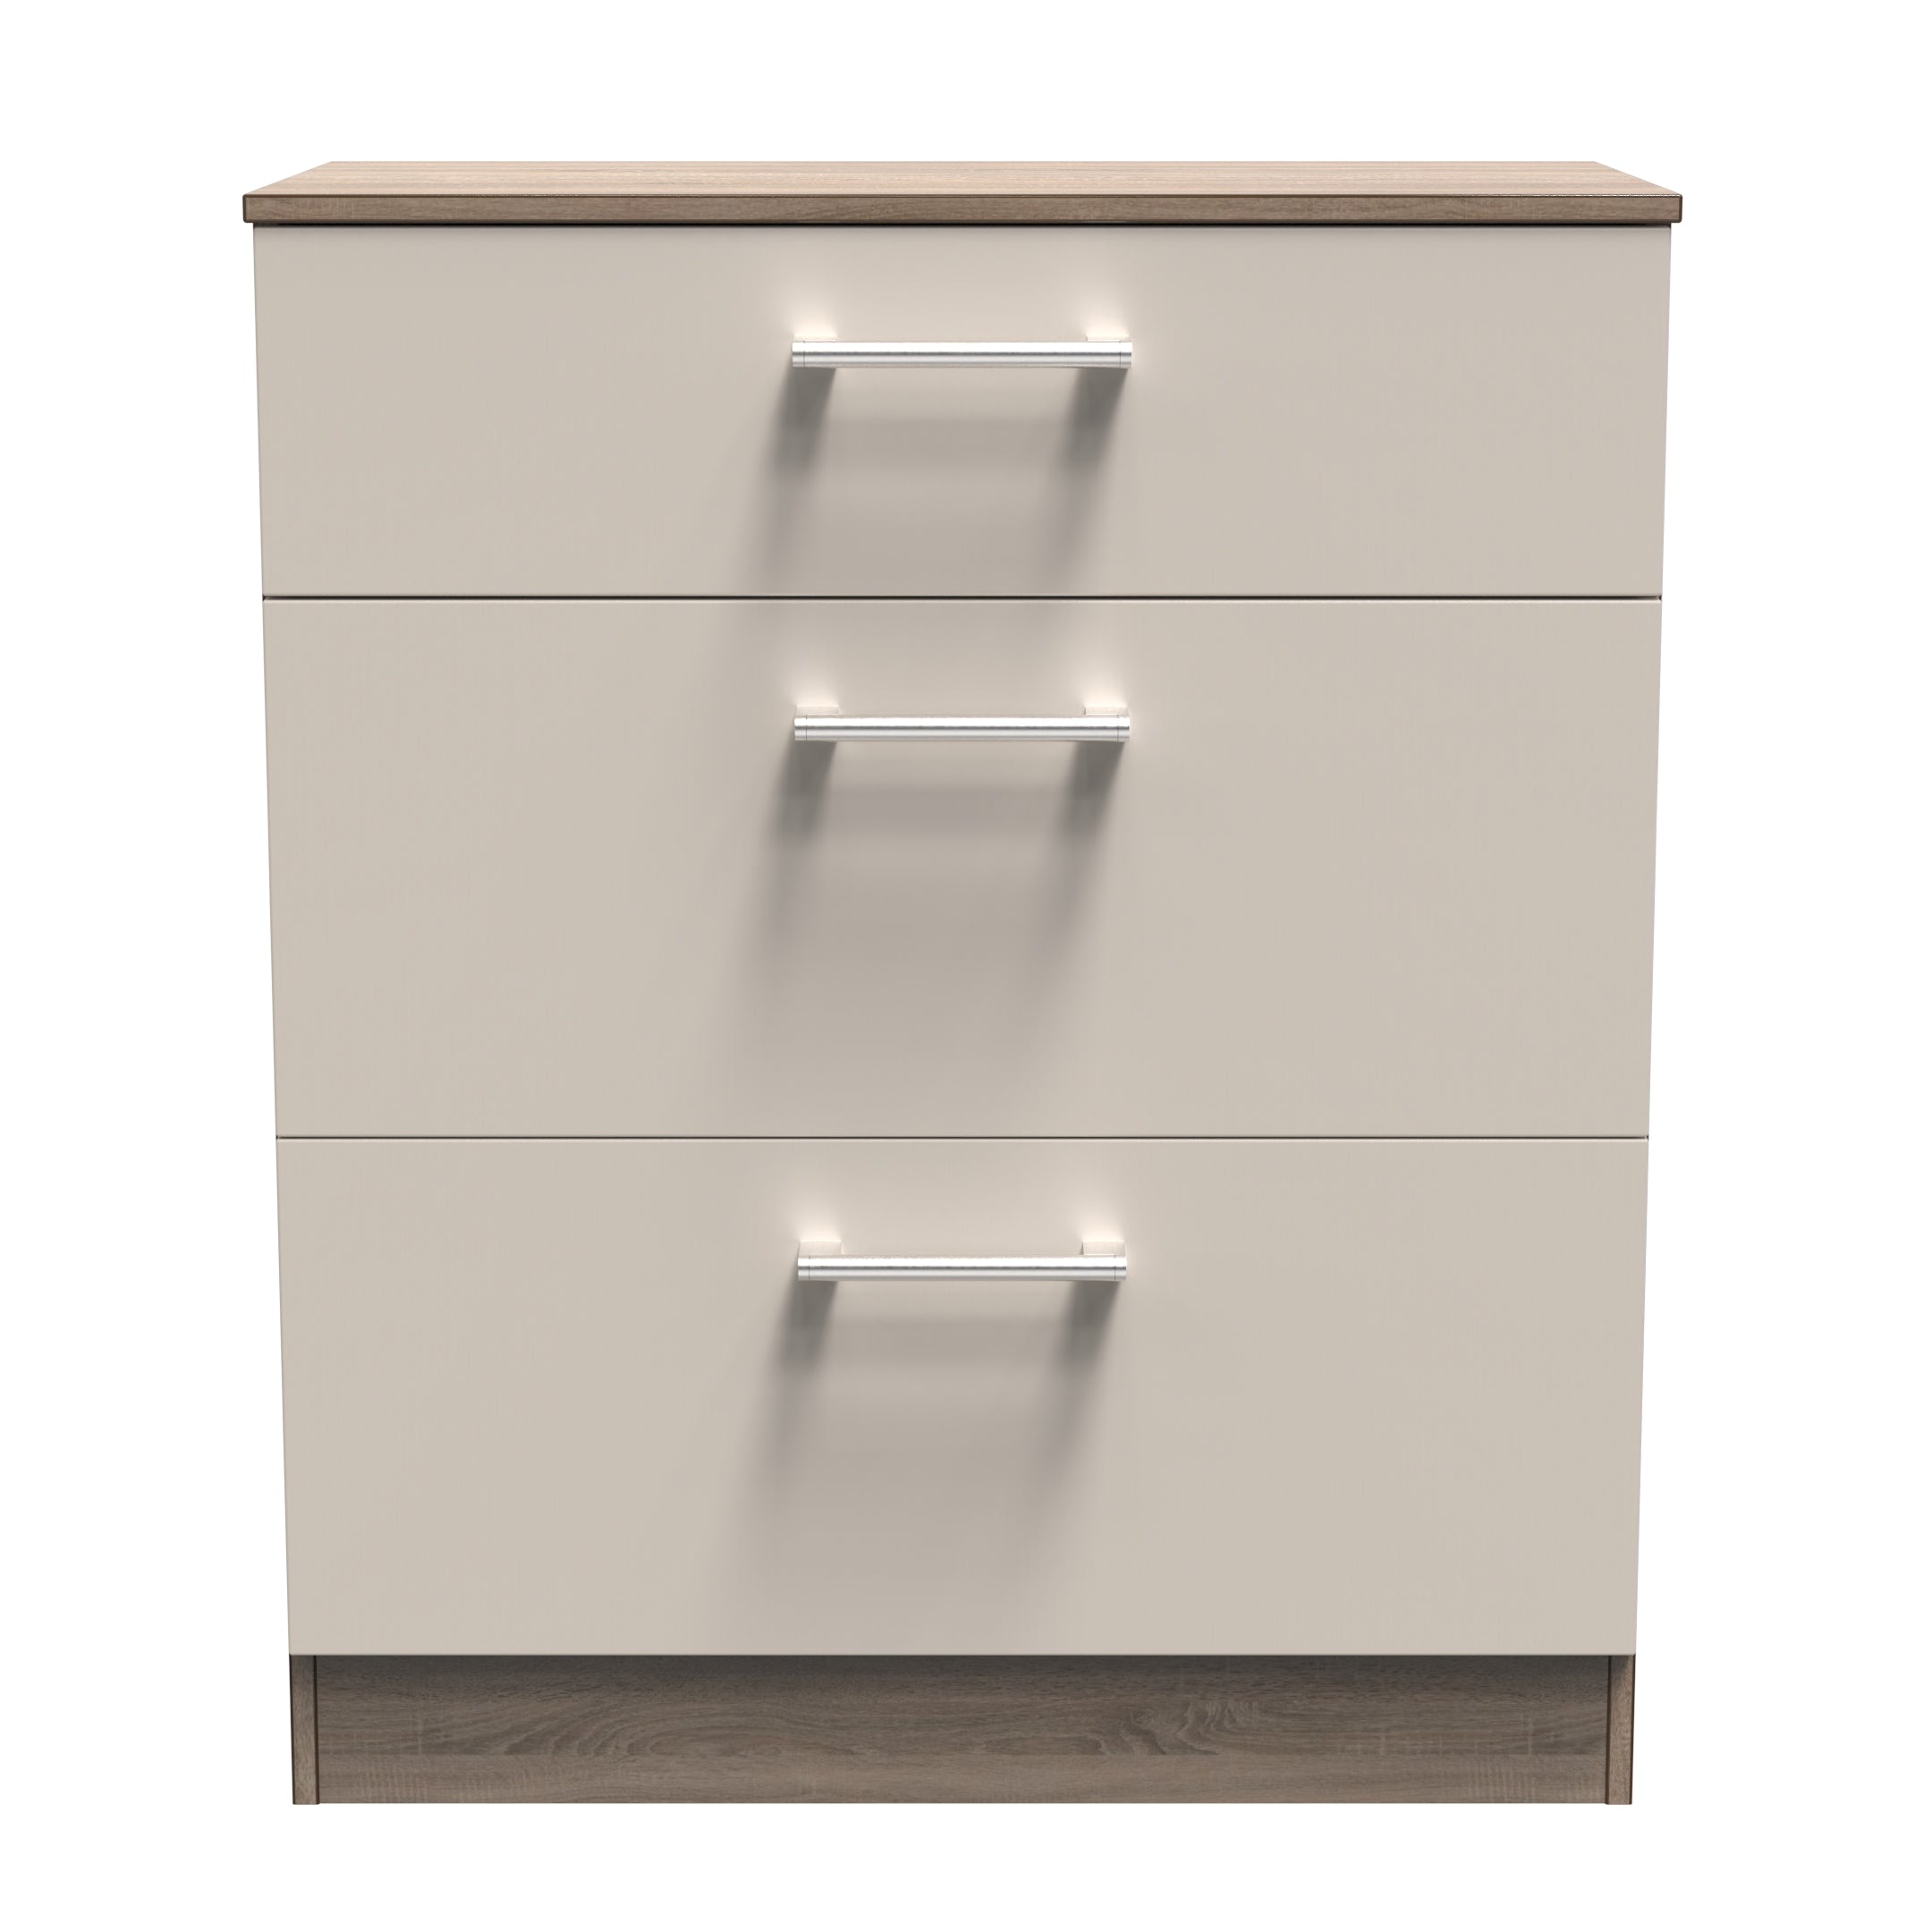 Stamford Ready Assembled Chest Of Drawers with 3 Drawers - Kashmir Matt / Darkolino - Lewis’s Home  | TJ Hughes